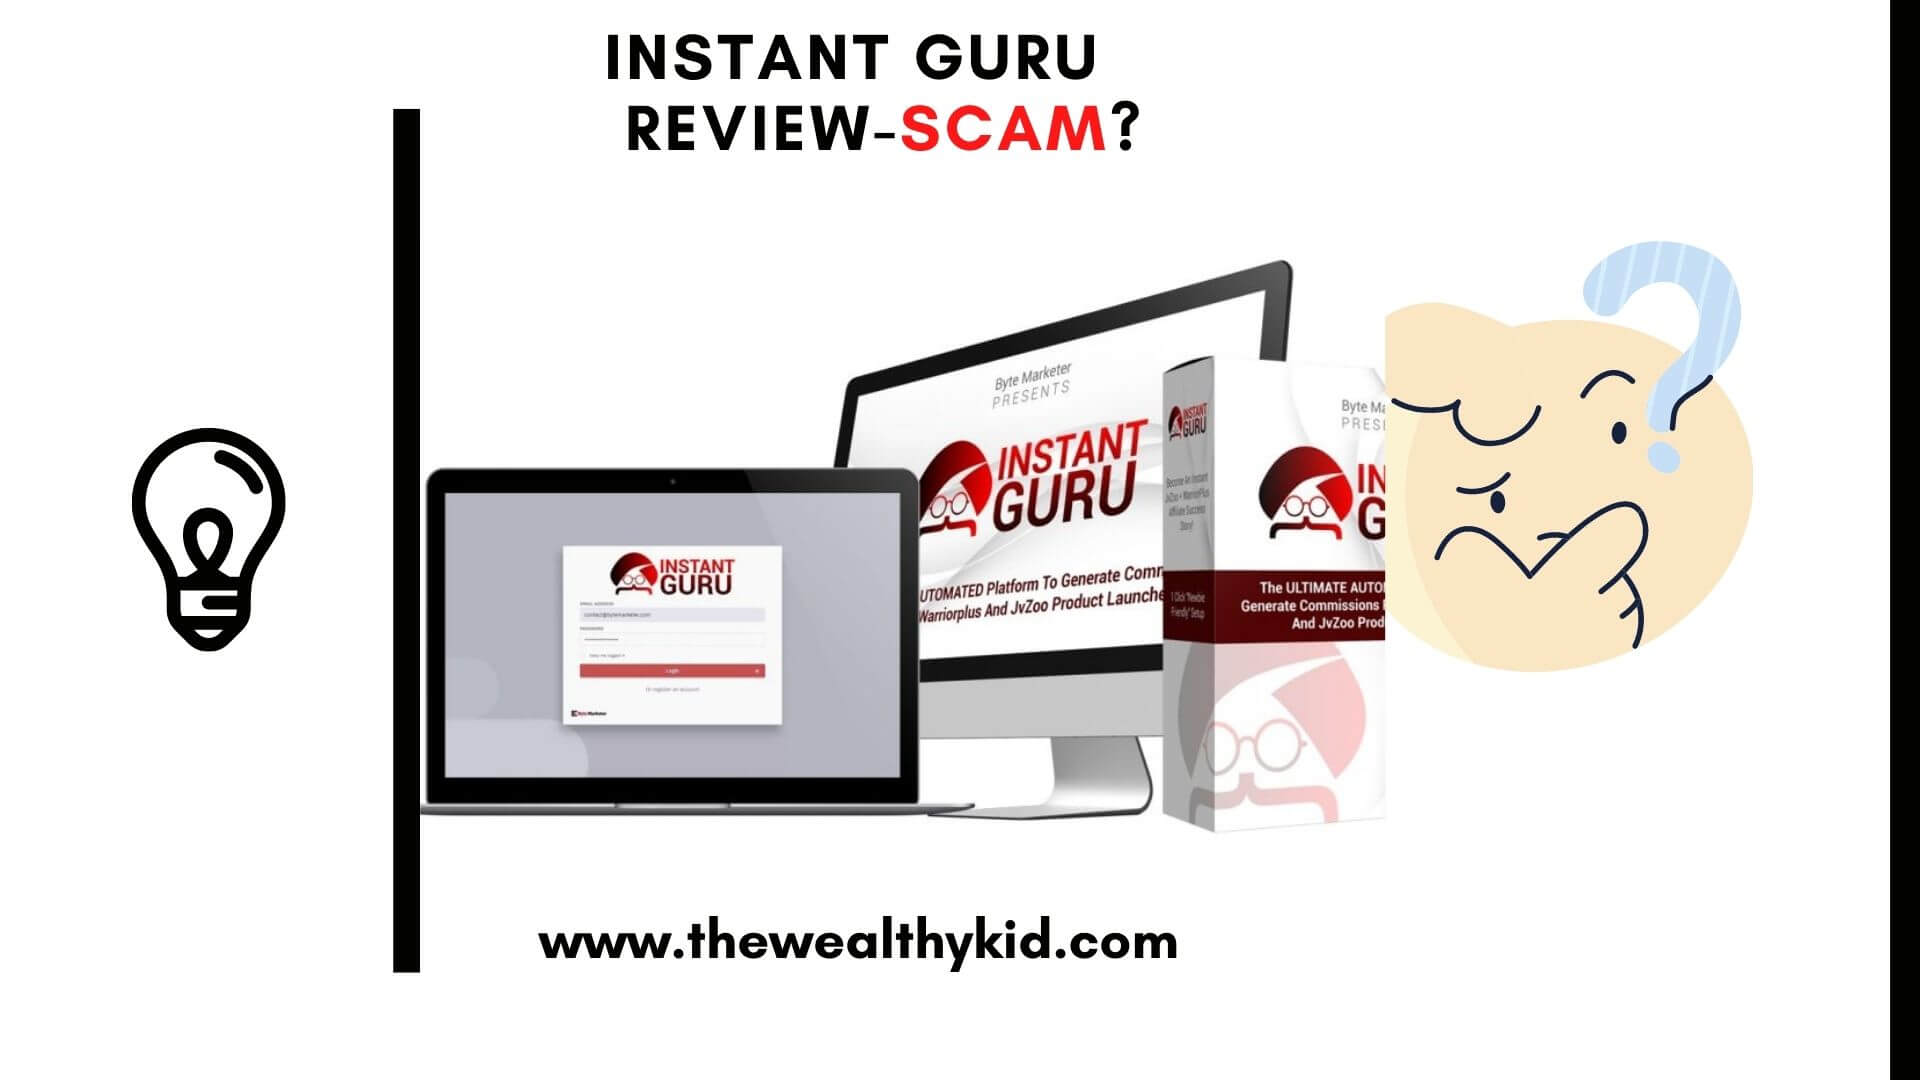 What Is Instant Guru? It’s Just A Shiny Object! Review